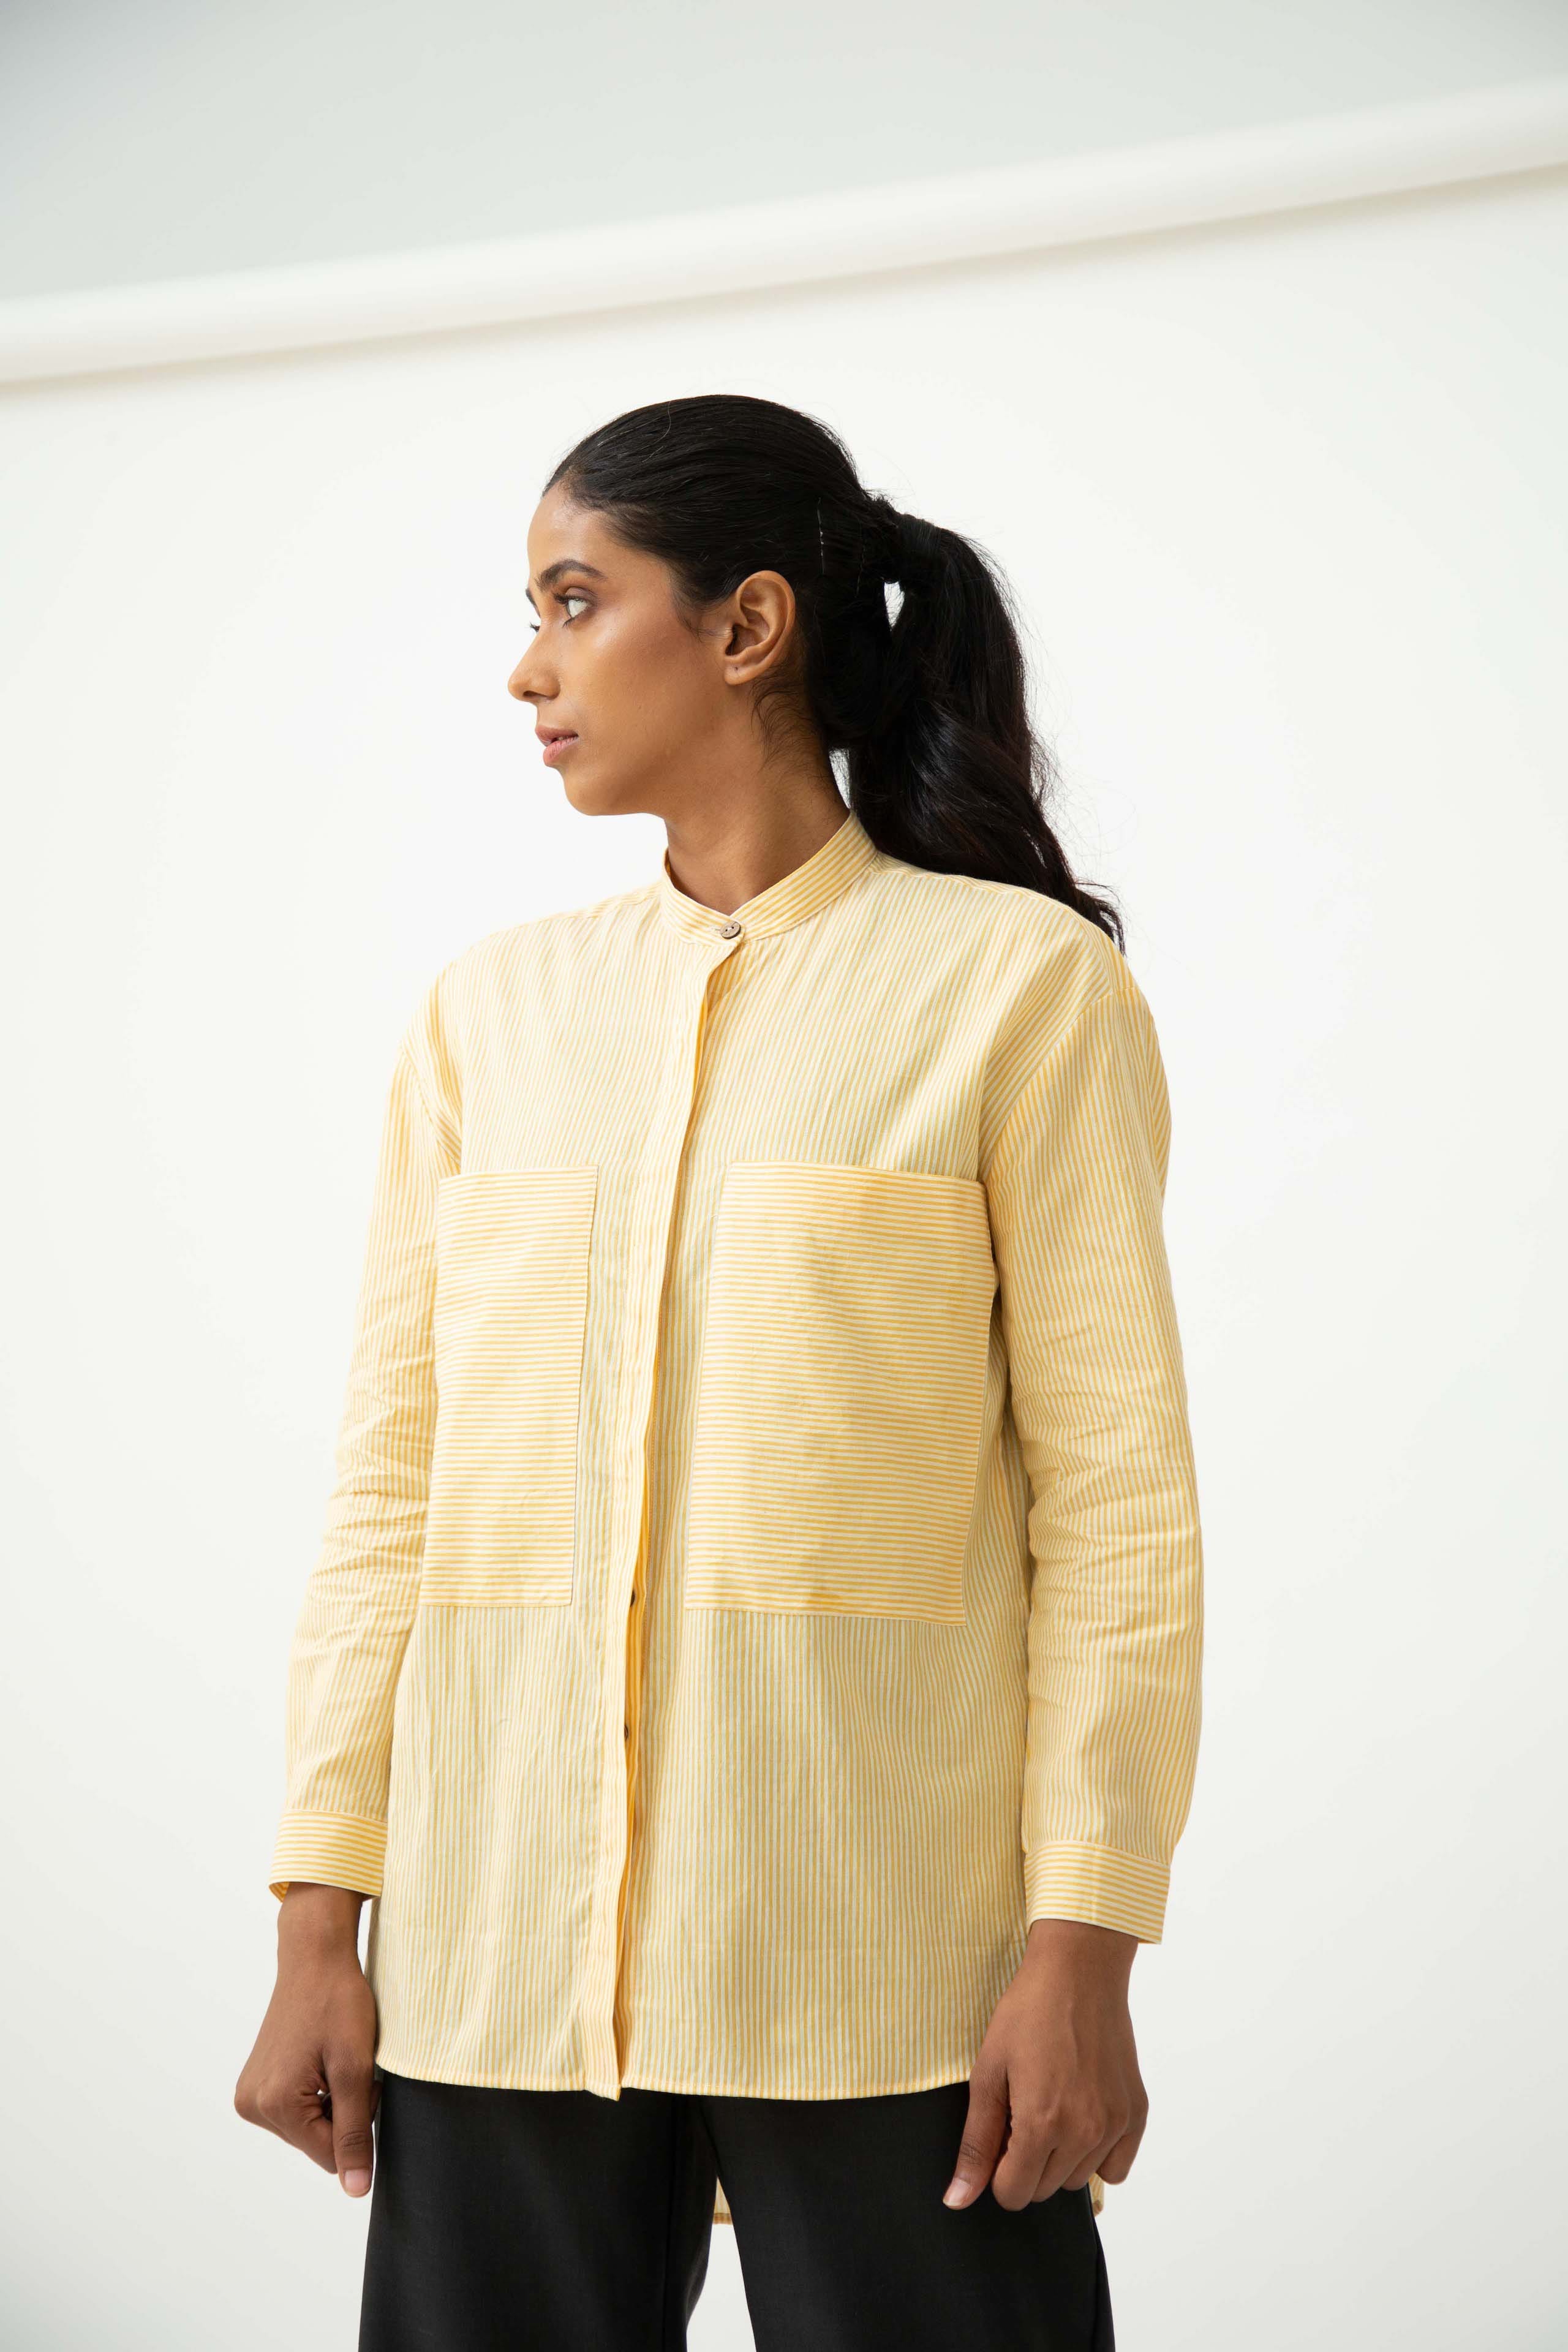 Saltpetre womens semi formal shirts - sunshine yellow with mandarin collar, full sleeves and front buttons. Made of soft handwoven cotton